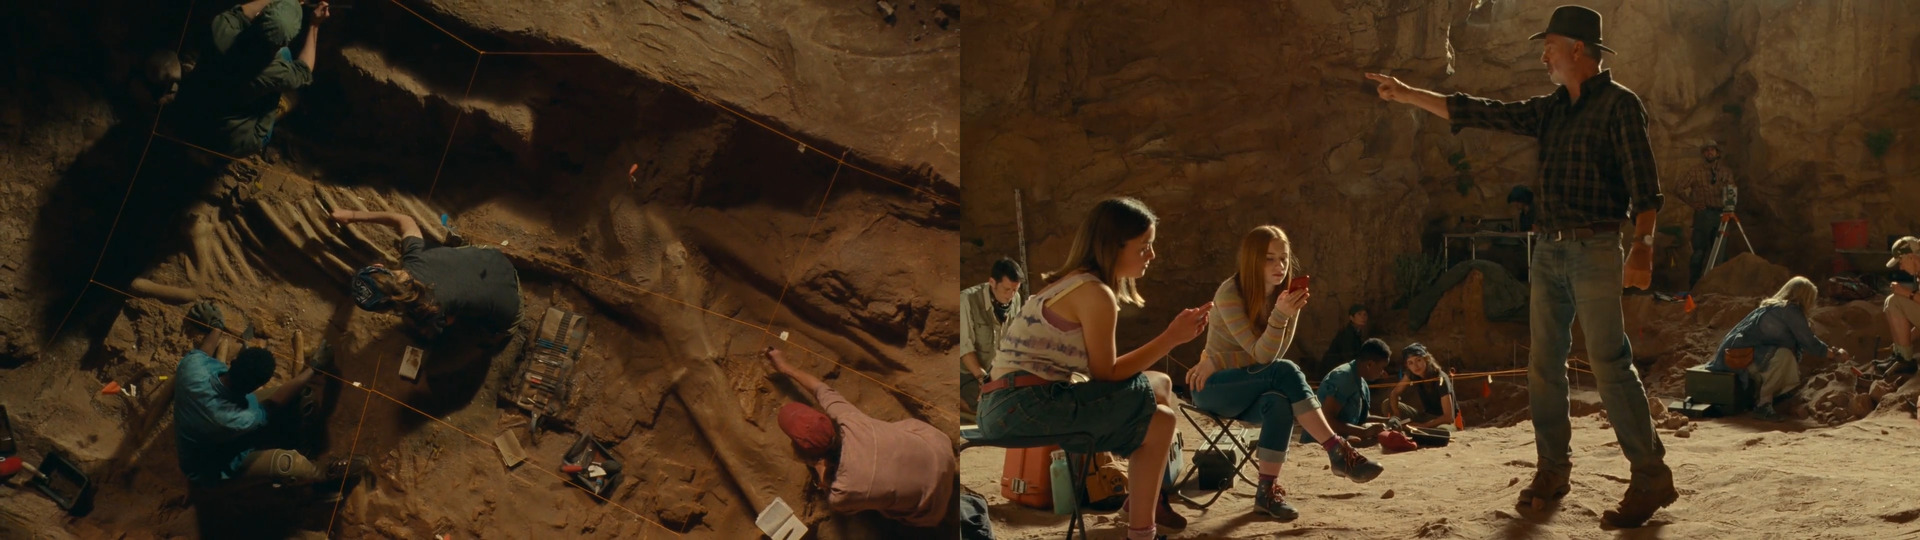 Left: overhead shot of people digging with Grant's speech in the background, right: Grant continues his speech; it's the same location